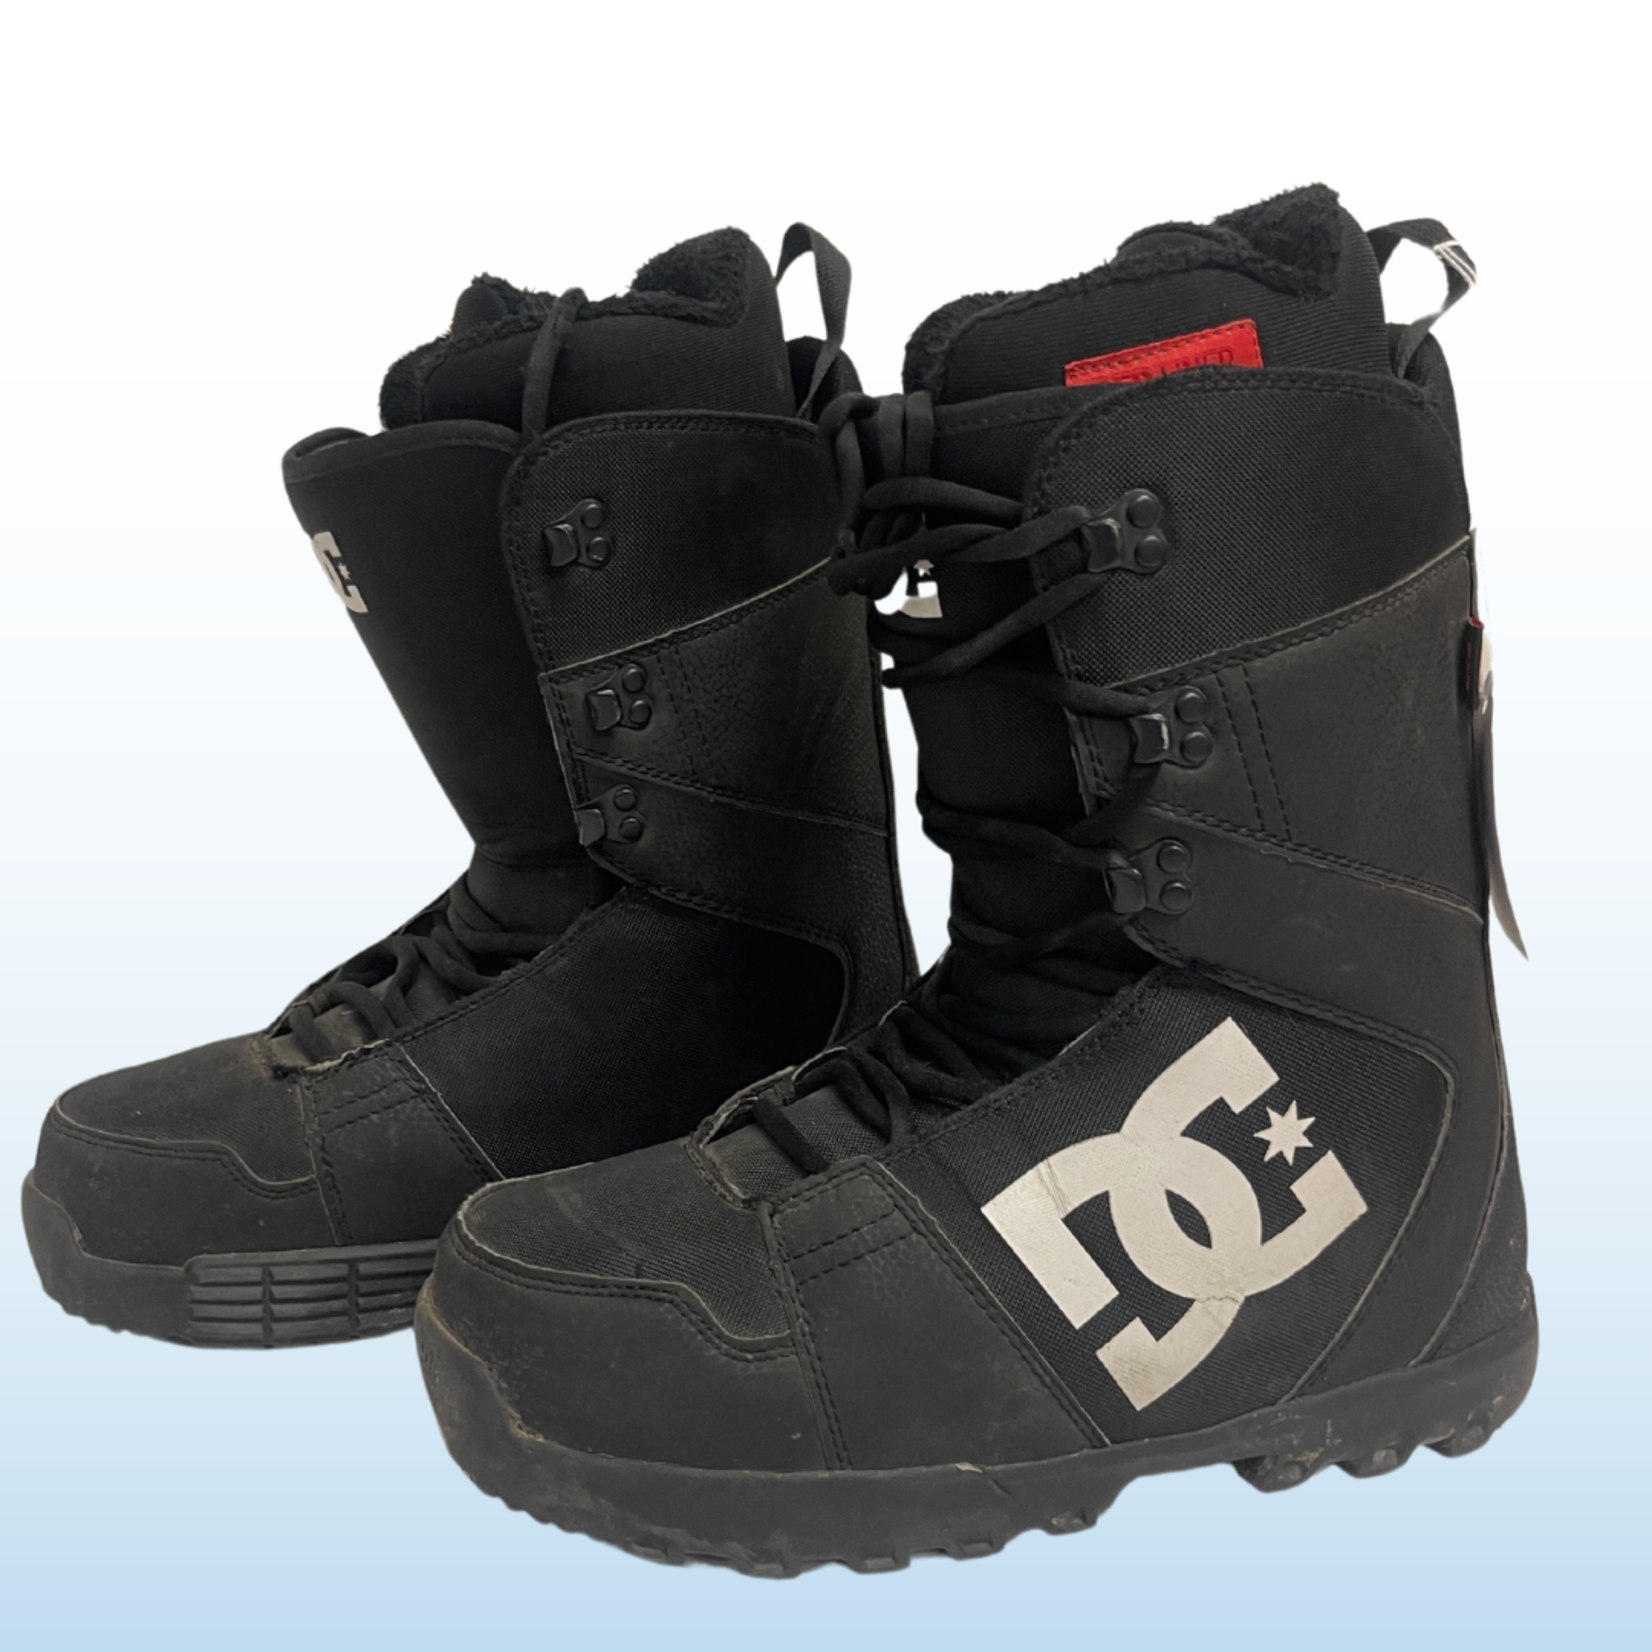 DC DC Phase Snowboard Boots, Size 10 Mens